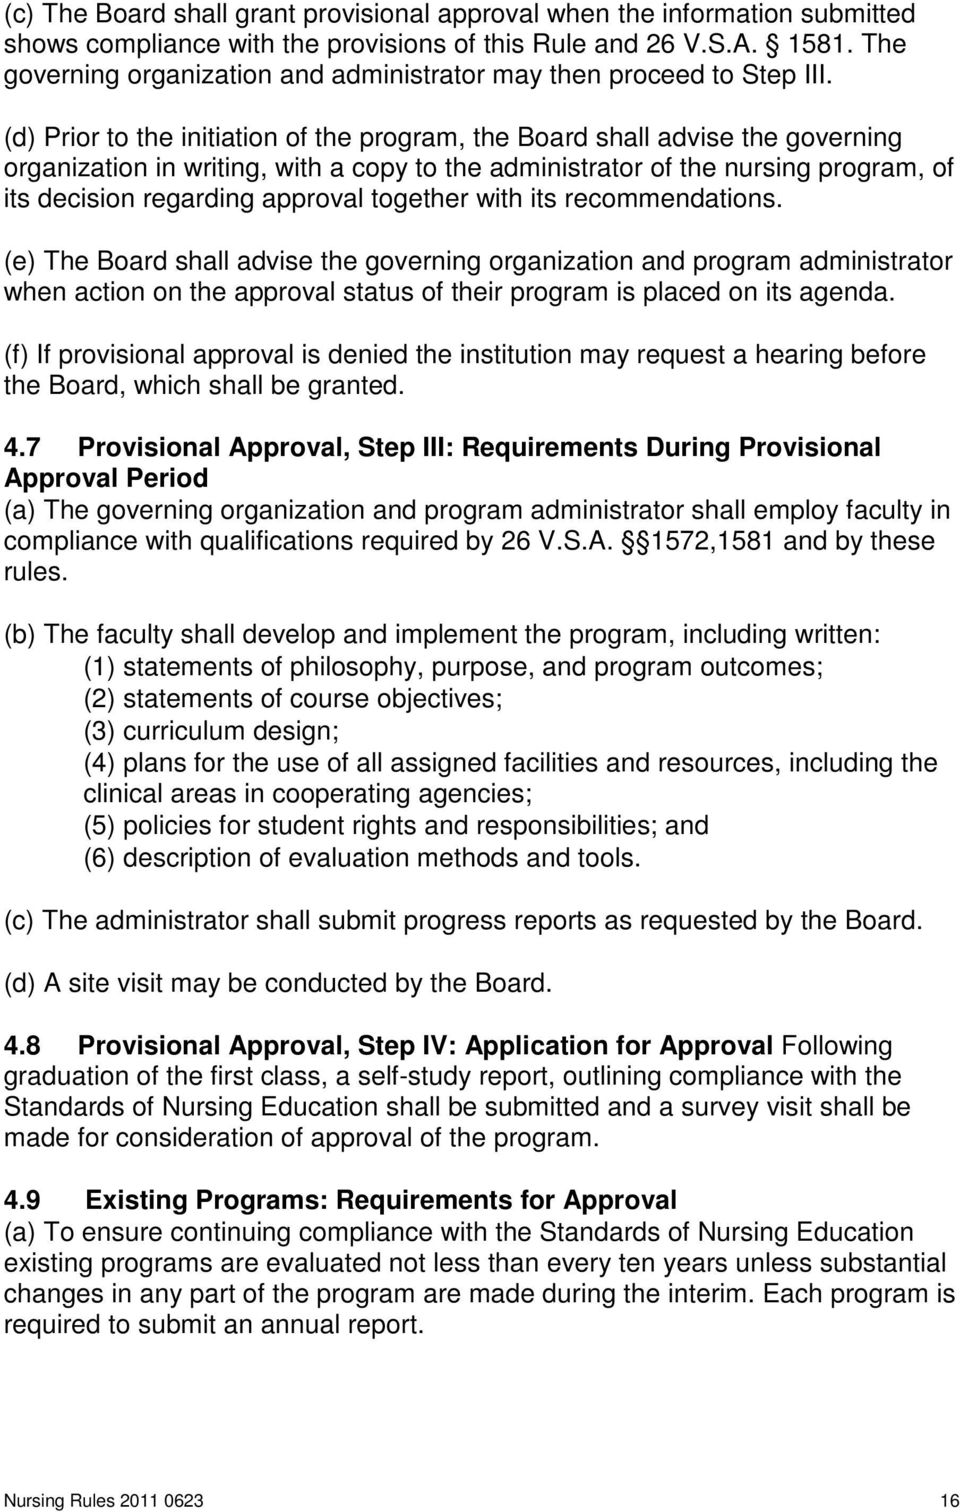 (d) Prior to the initiation of the program, the Board shall advise the governing organization in writing, with a copy to the administrator of the nursing program, of its decision regarding approval